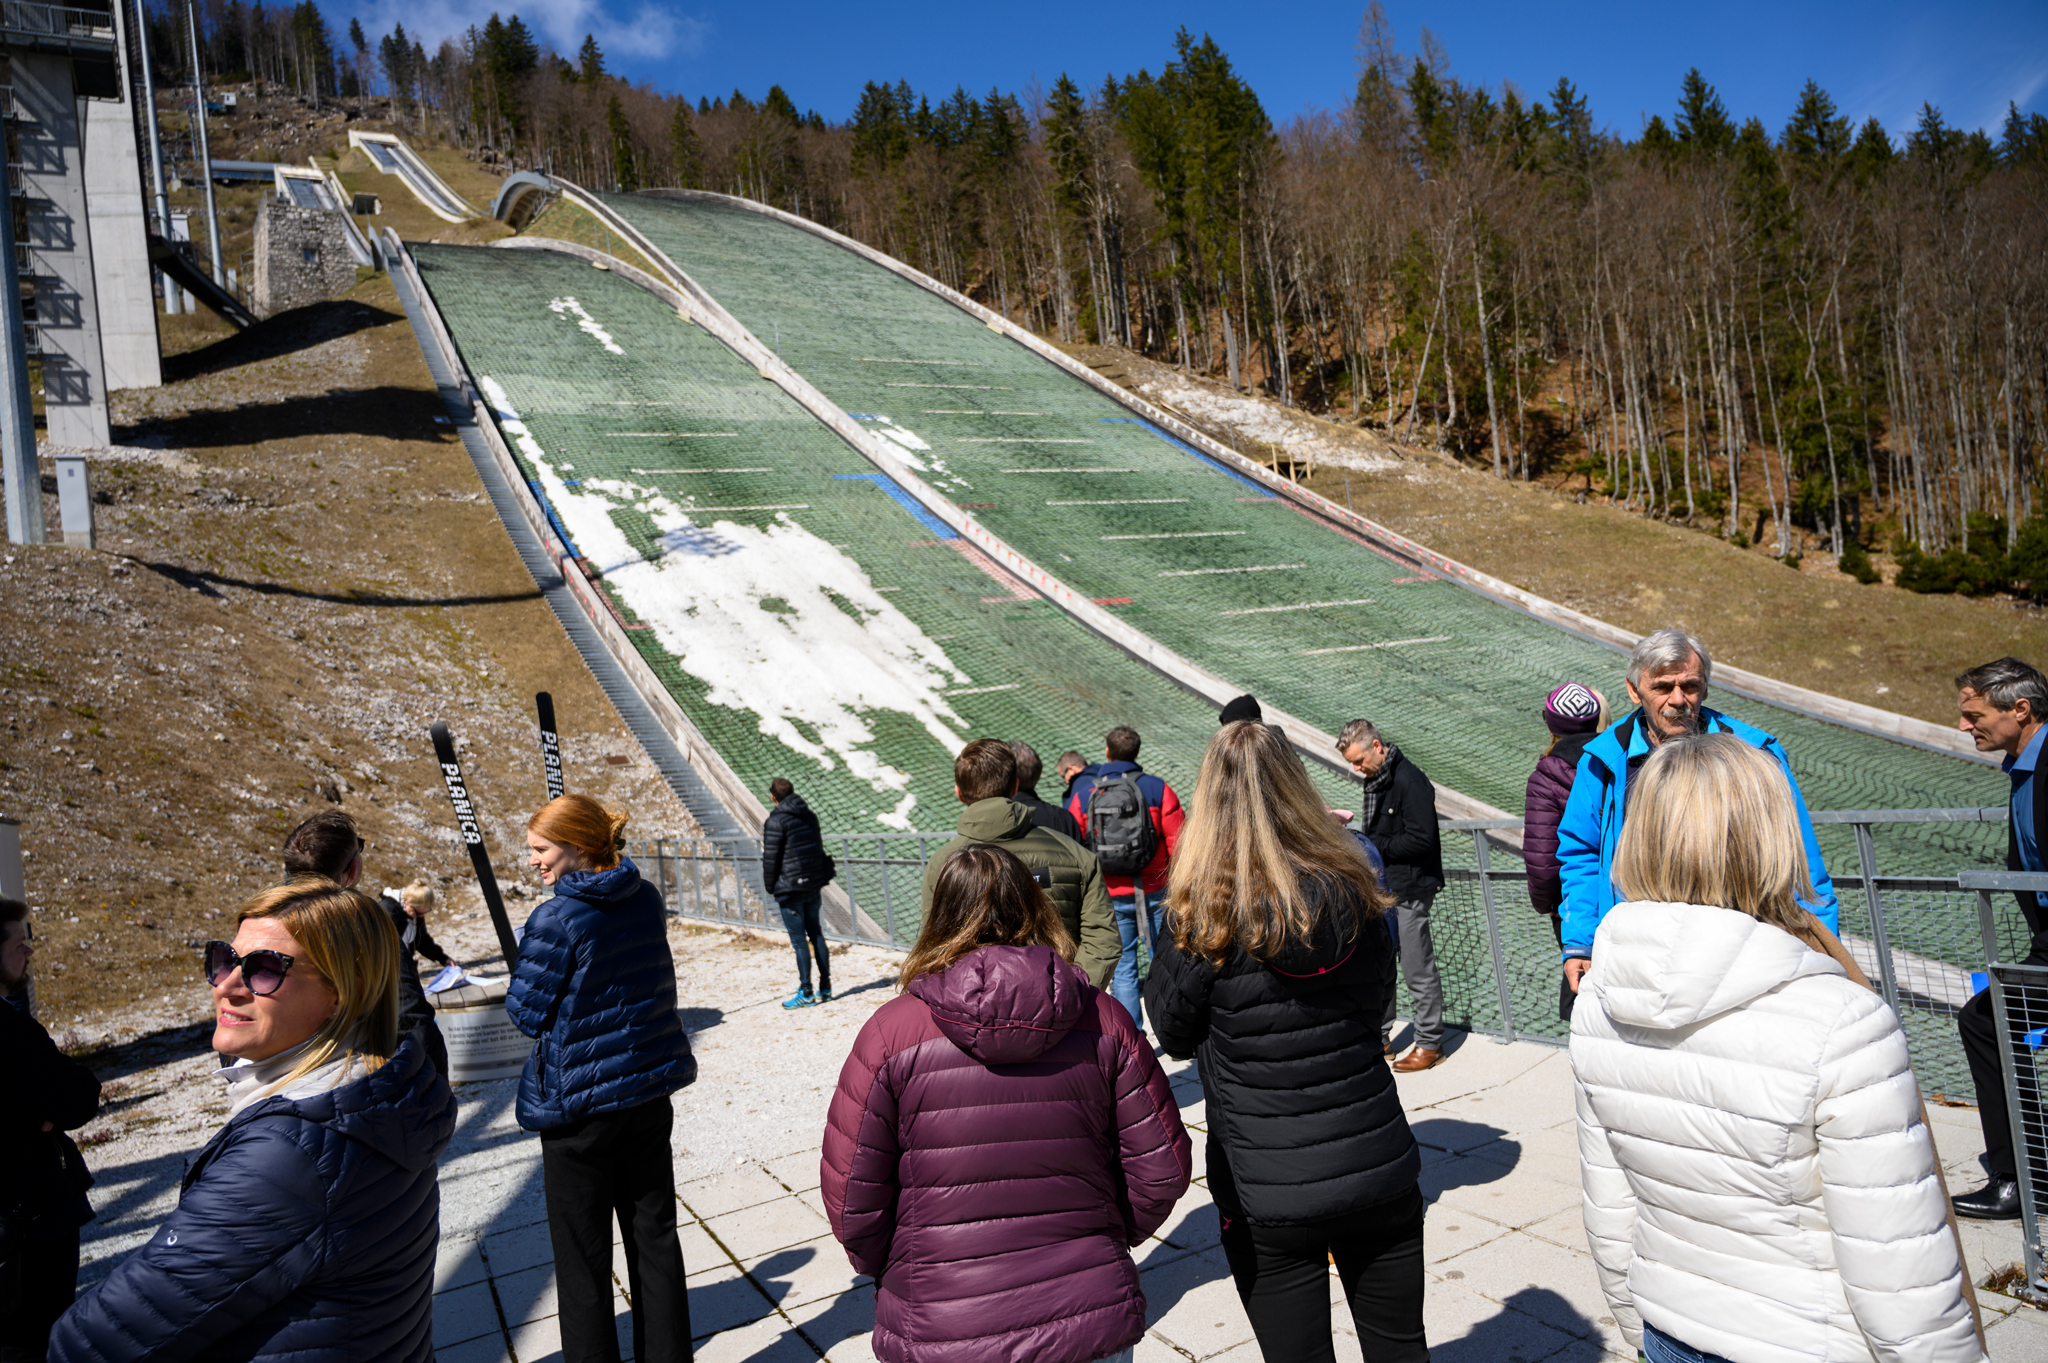 Planica hosts the World Broadcaster Meeting Planica